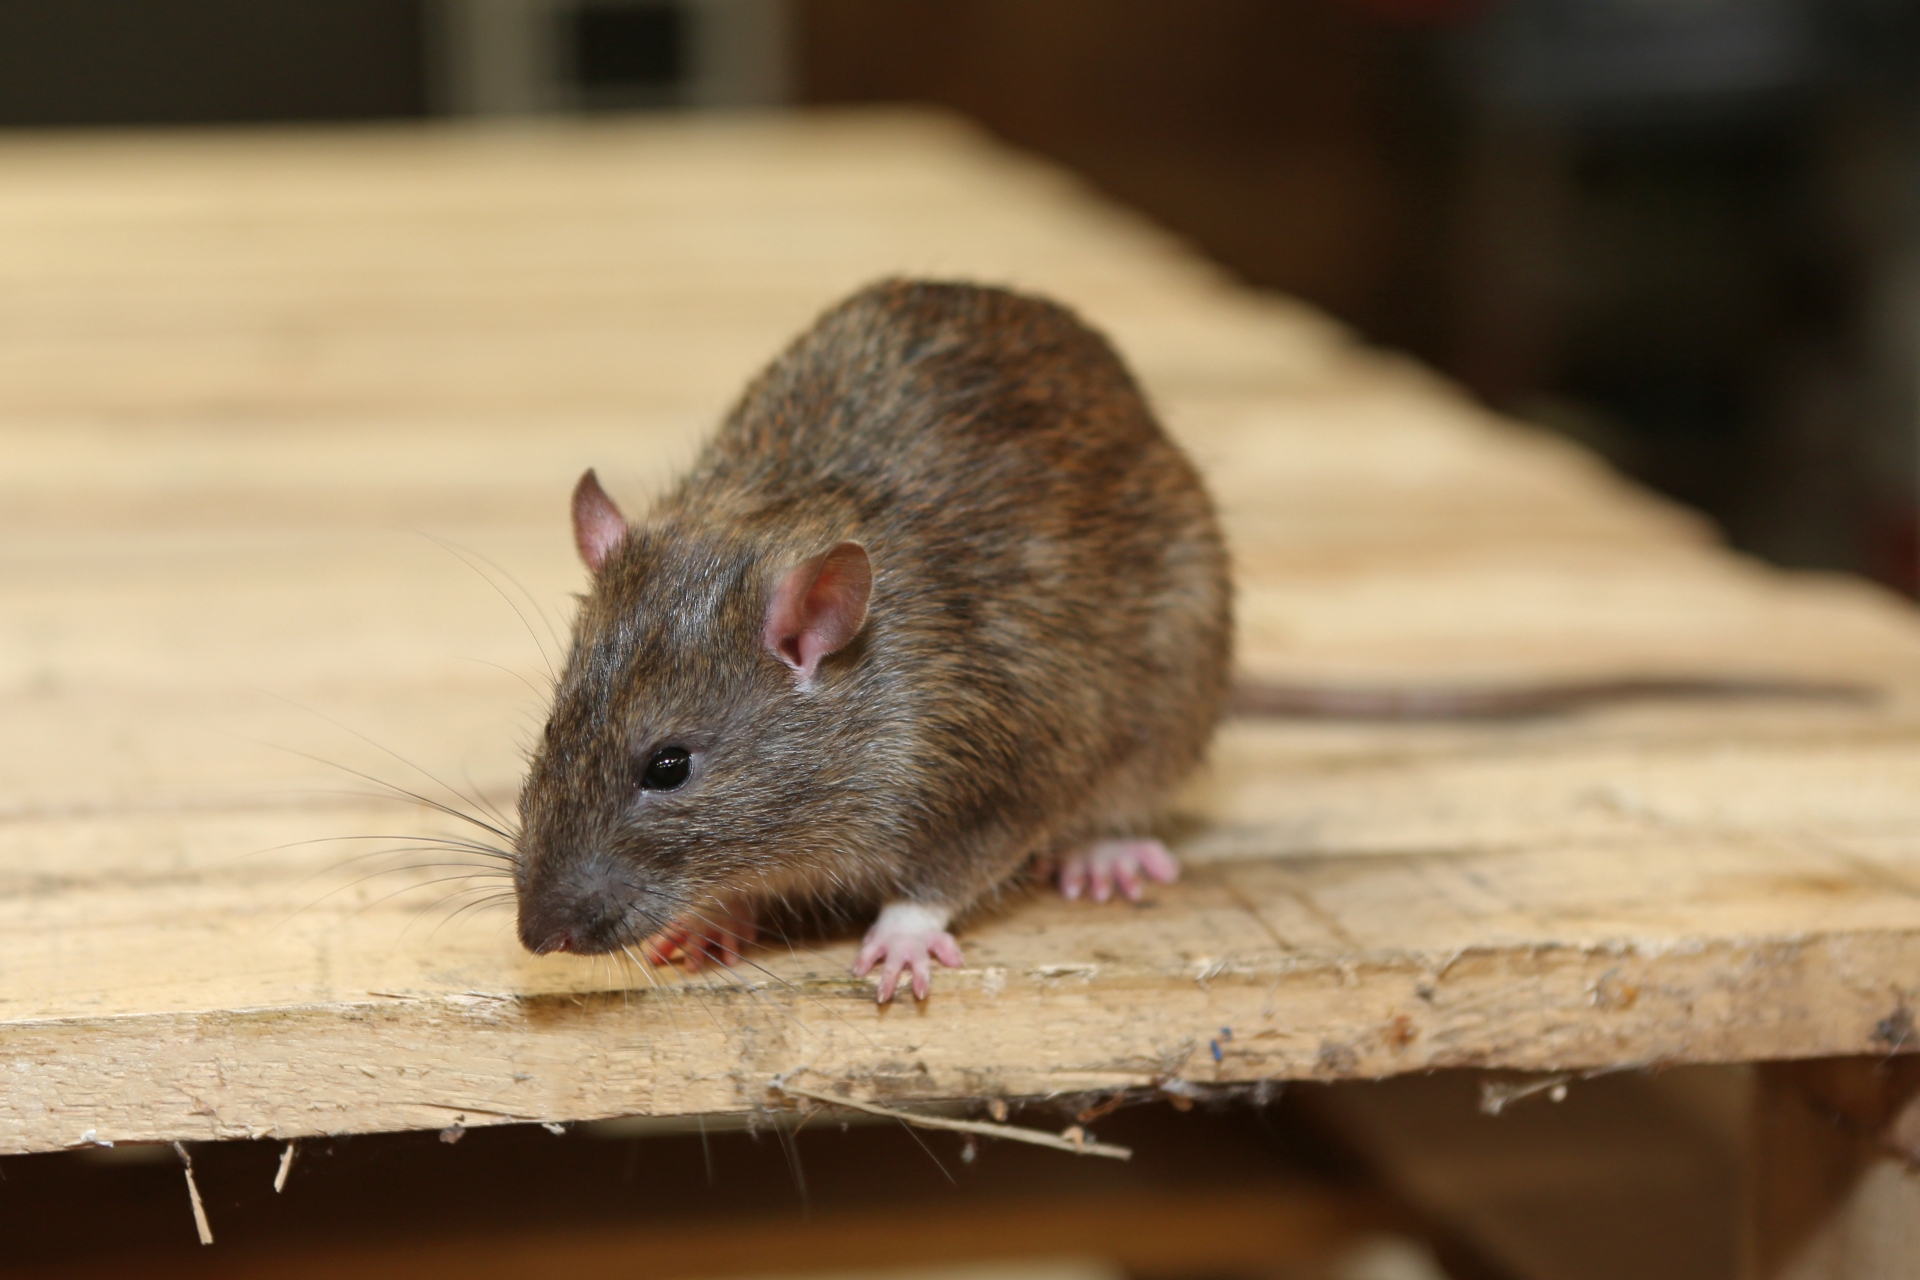 Rat Control, Pest Control in Walthamstow, E17. Call Now 020 8166 9746